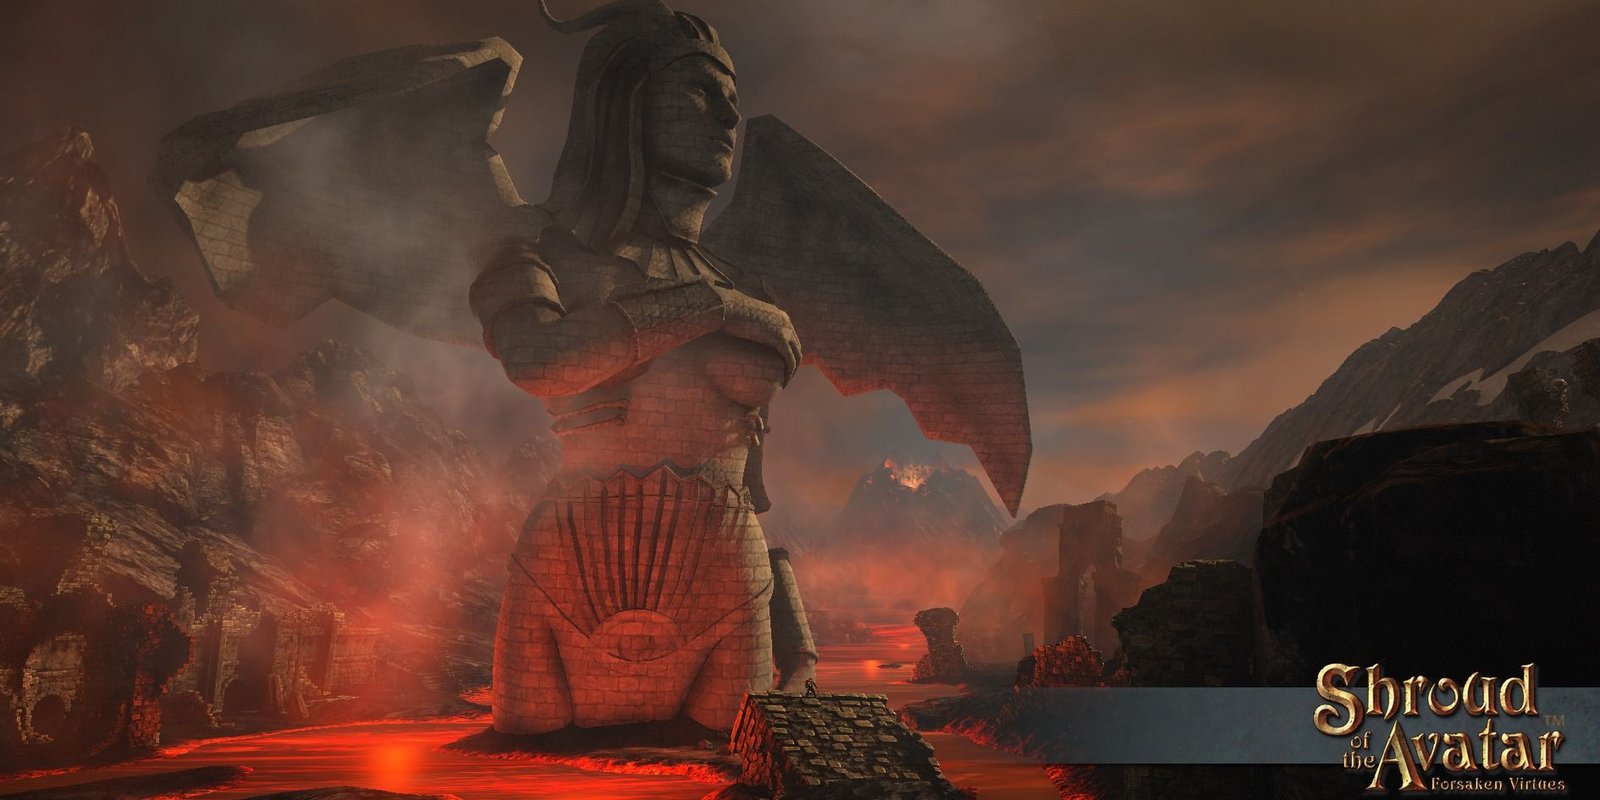 shroud of the avatar giant statue in lava